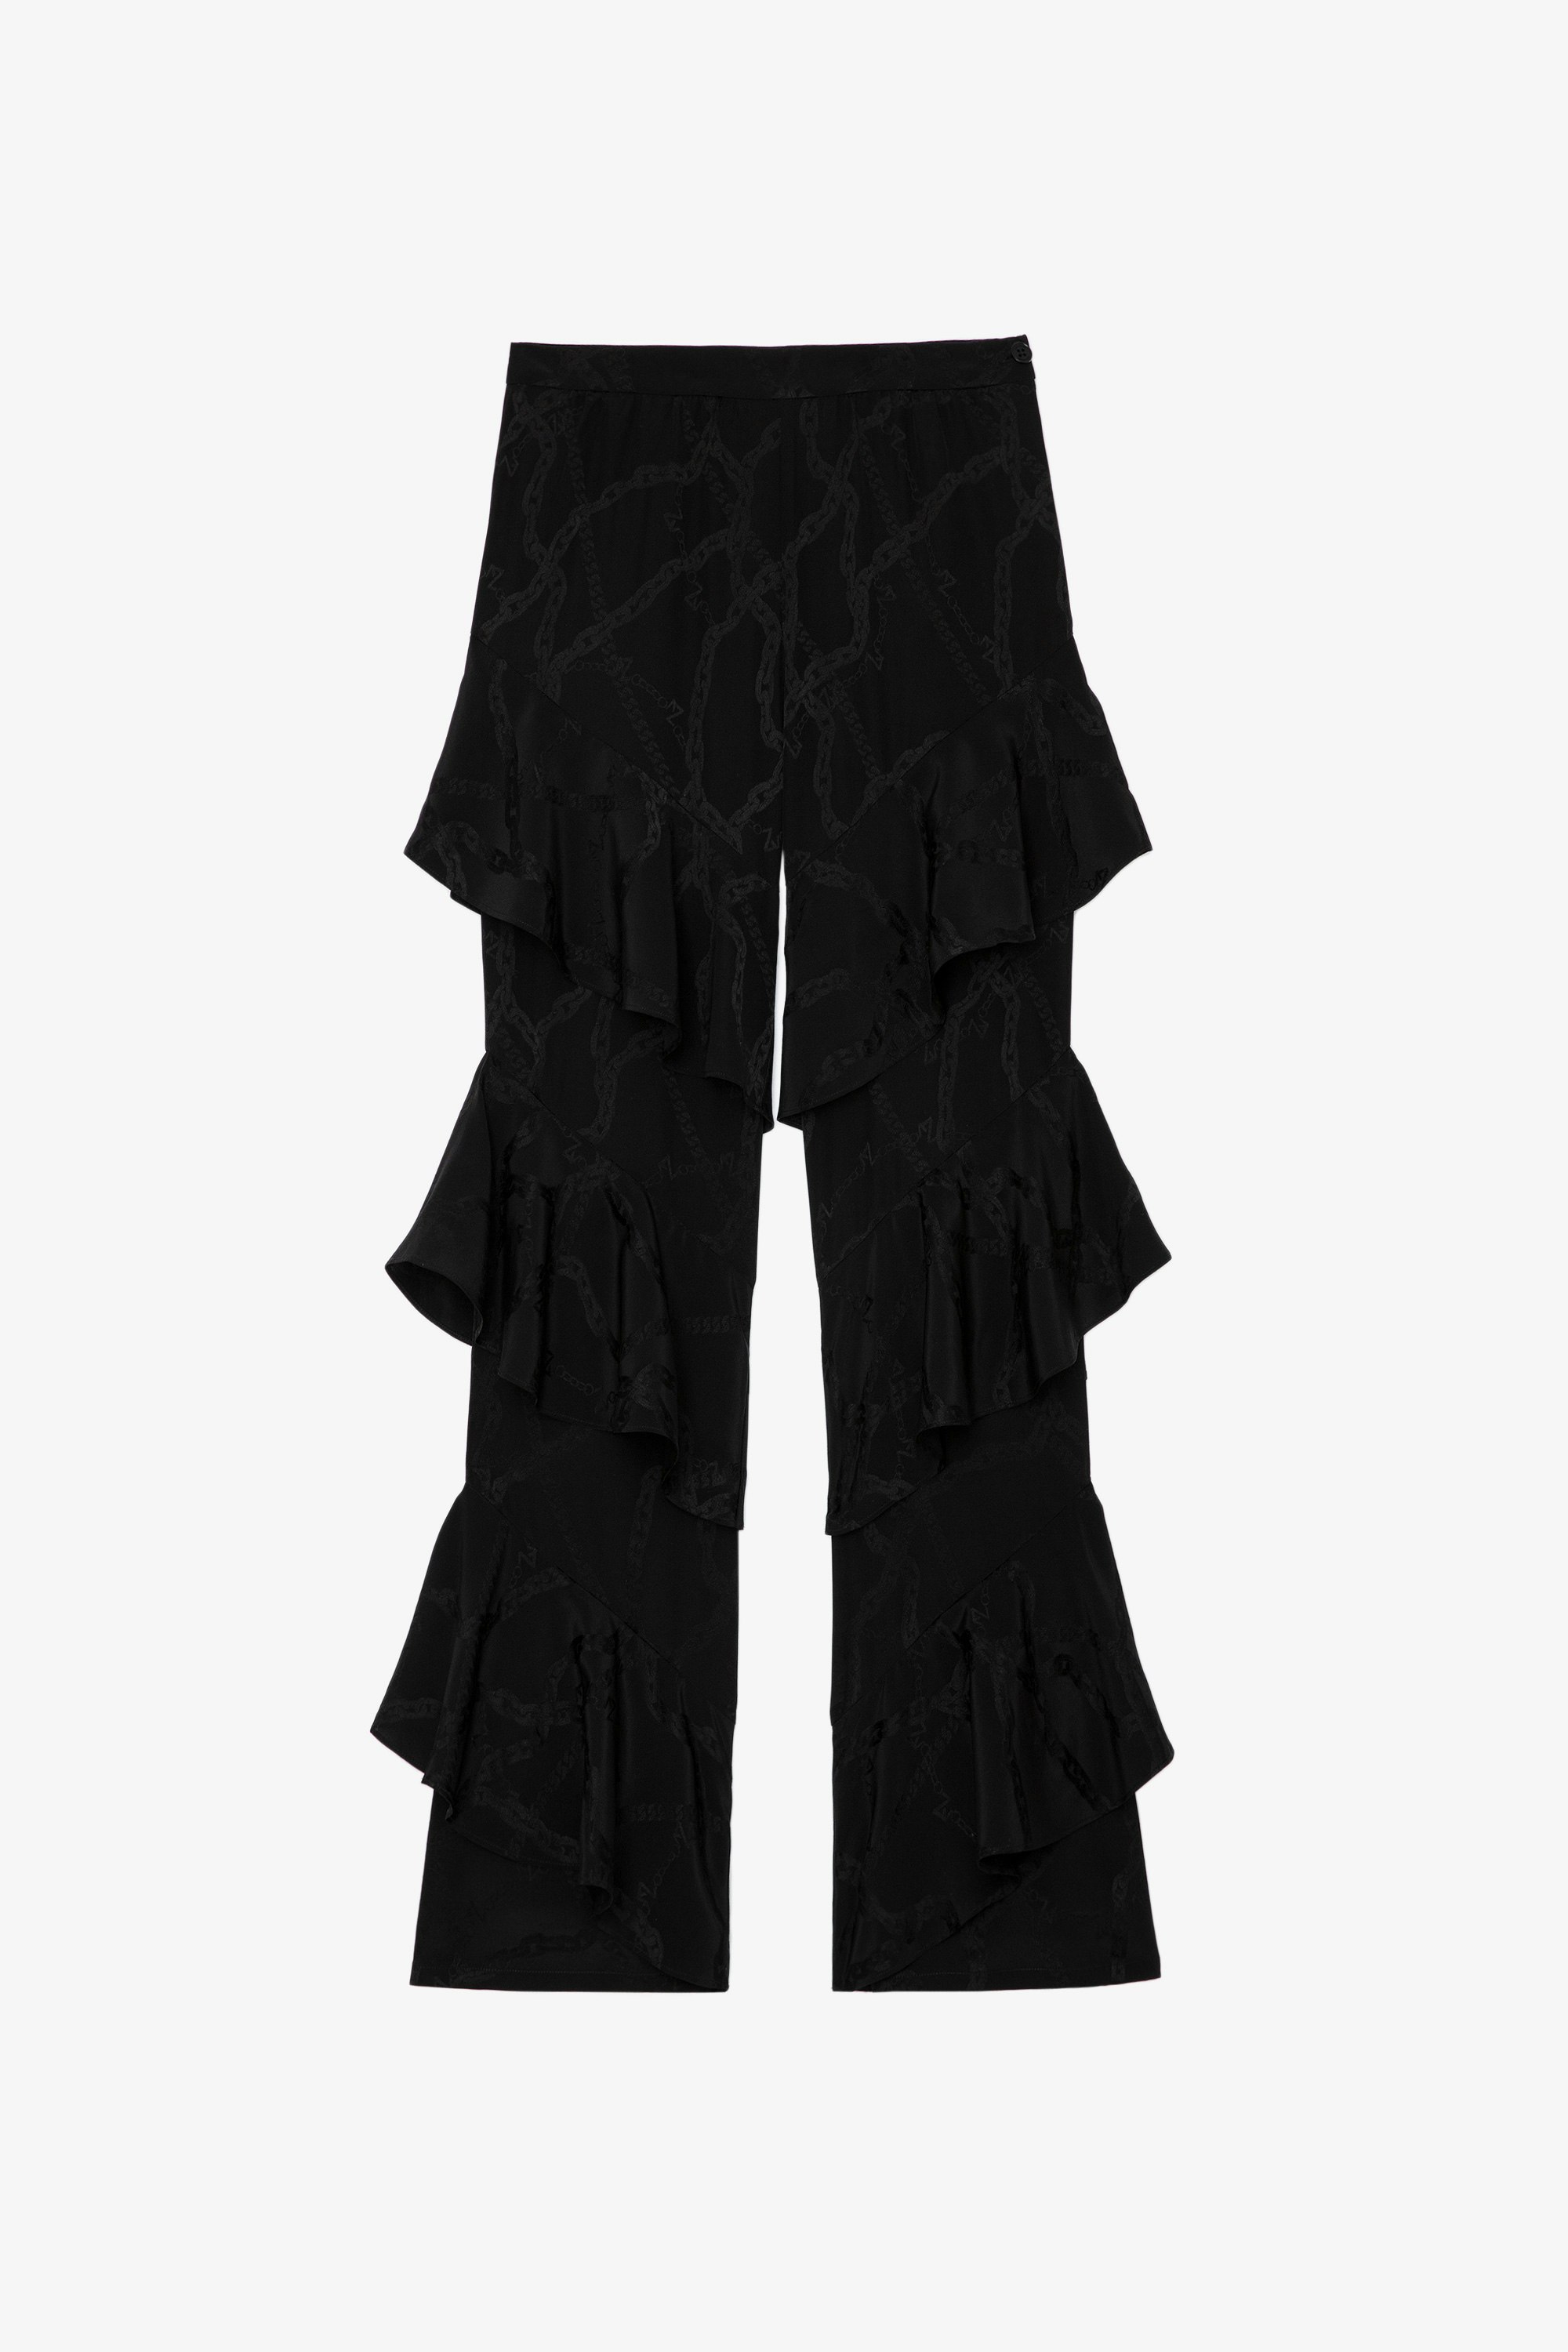 Poum Chains Silk Trousers Women’s black silk trousers with ruffles and jacquard ZV chains 